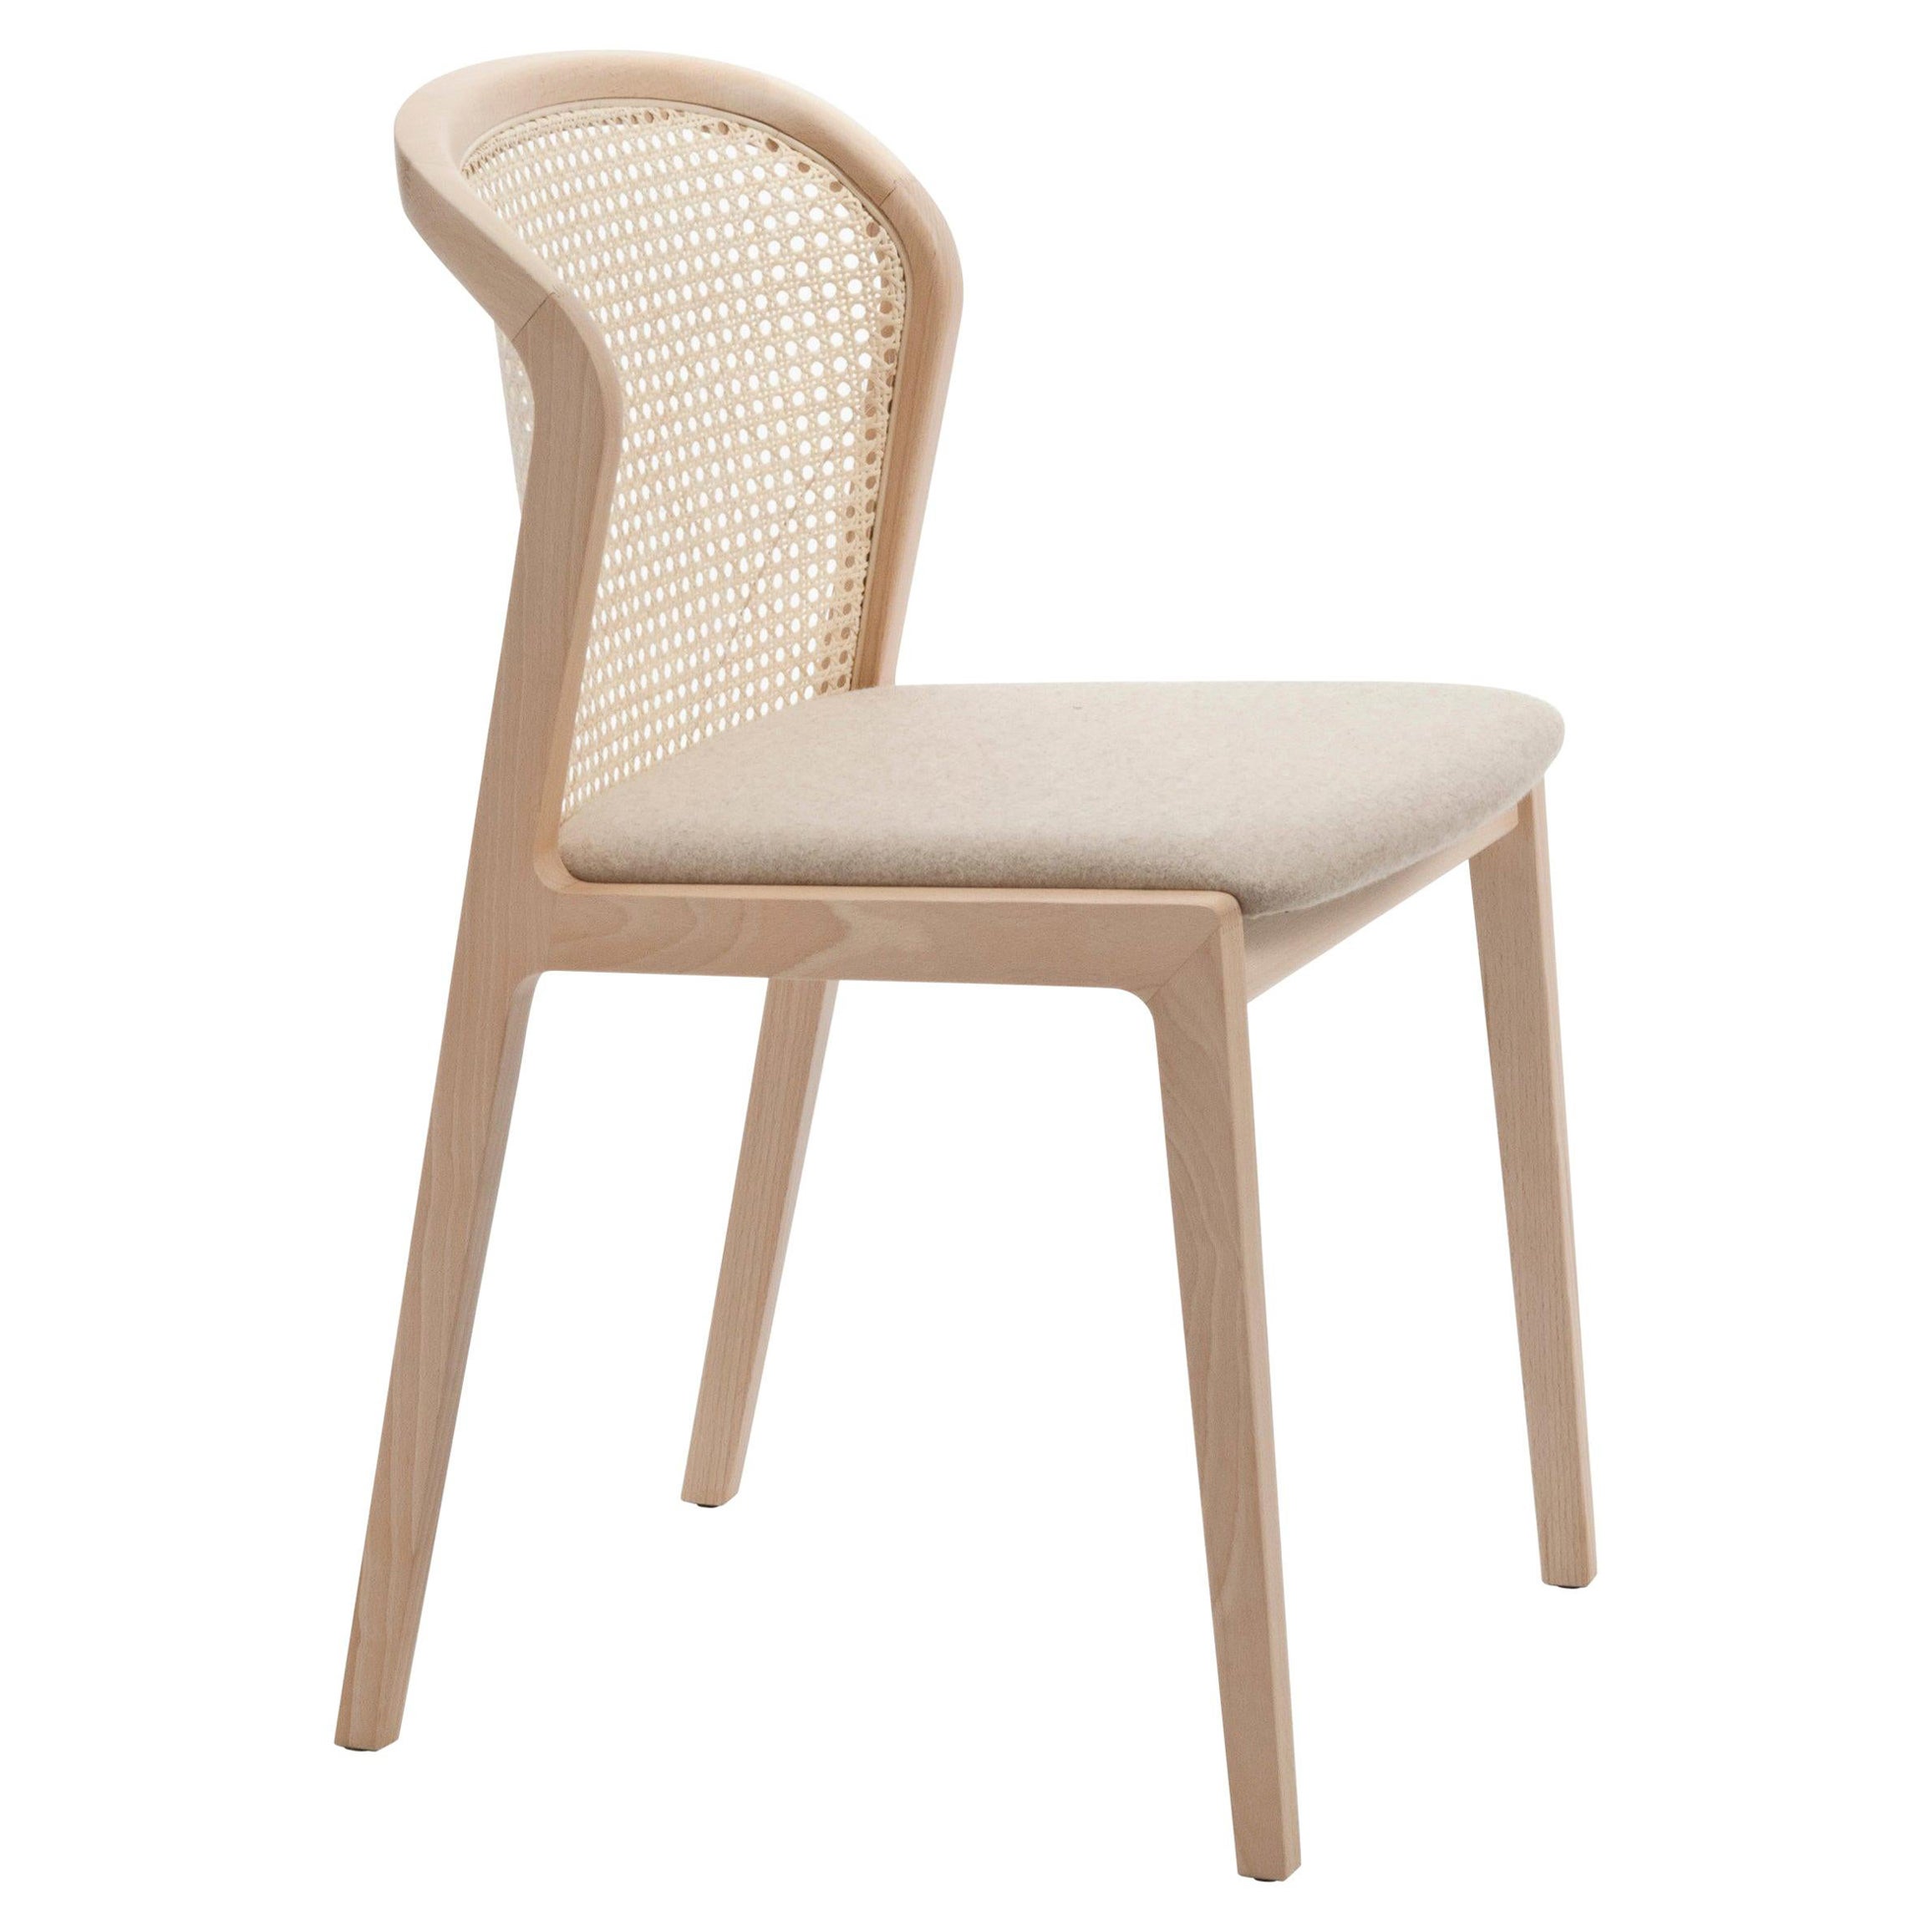 Set of 6 new chairs. Vienna is an extraordinarily comfortable and elegant chair designed by french designer Emmanuel Gallina, who loves to quote Brancusi when saying that “simplicity is complexity resolved”. 
In solid beech and straw, it is a